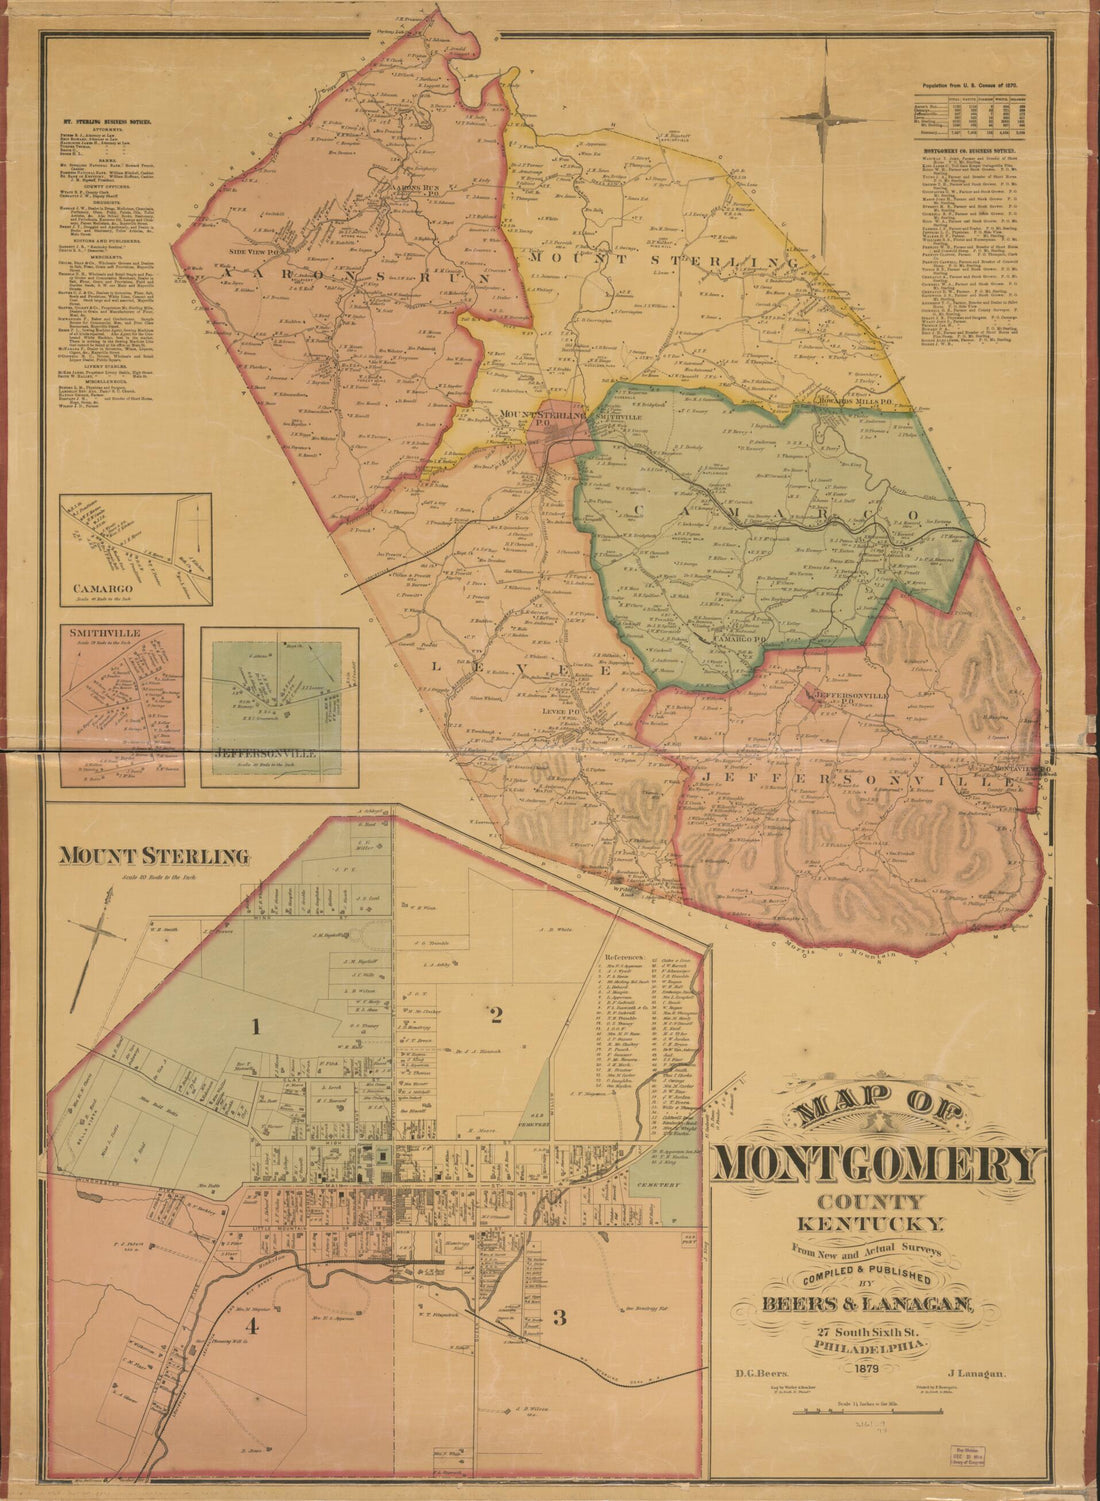 This old map of Map of Montgomery County, Kentucky from 1879 was created by D. G. (Daniel G.) Beers, F. (Frederick) Bourquin, J. Lanagan,  Worley &amp; Bracher in 1879